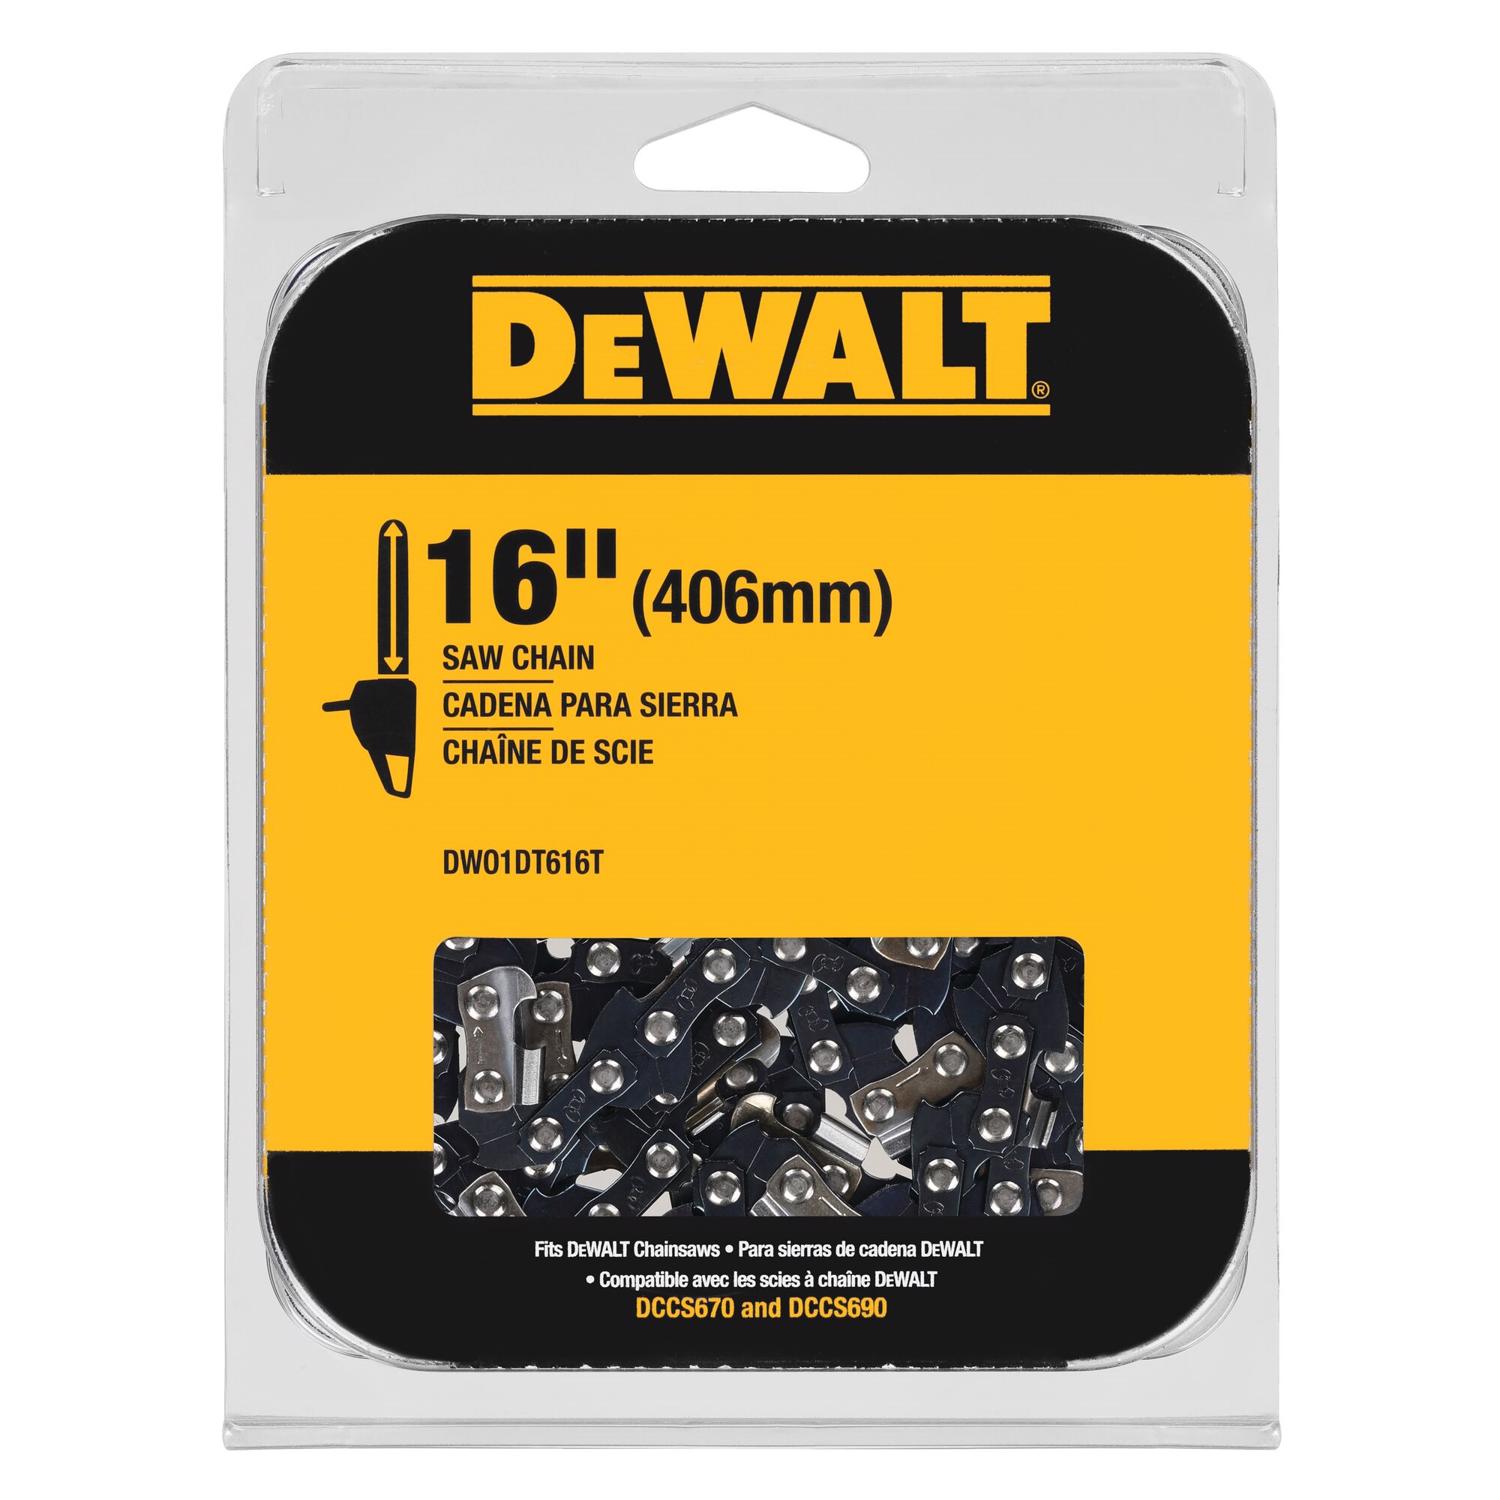 Photos - Chain / Reciprocating Saw Blade DeWALT Centri-Lube DWO1DT616T 16 in. Chainsaw Chain 56 links 